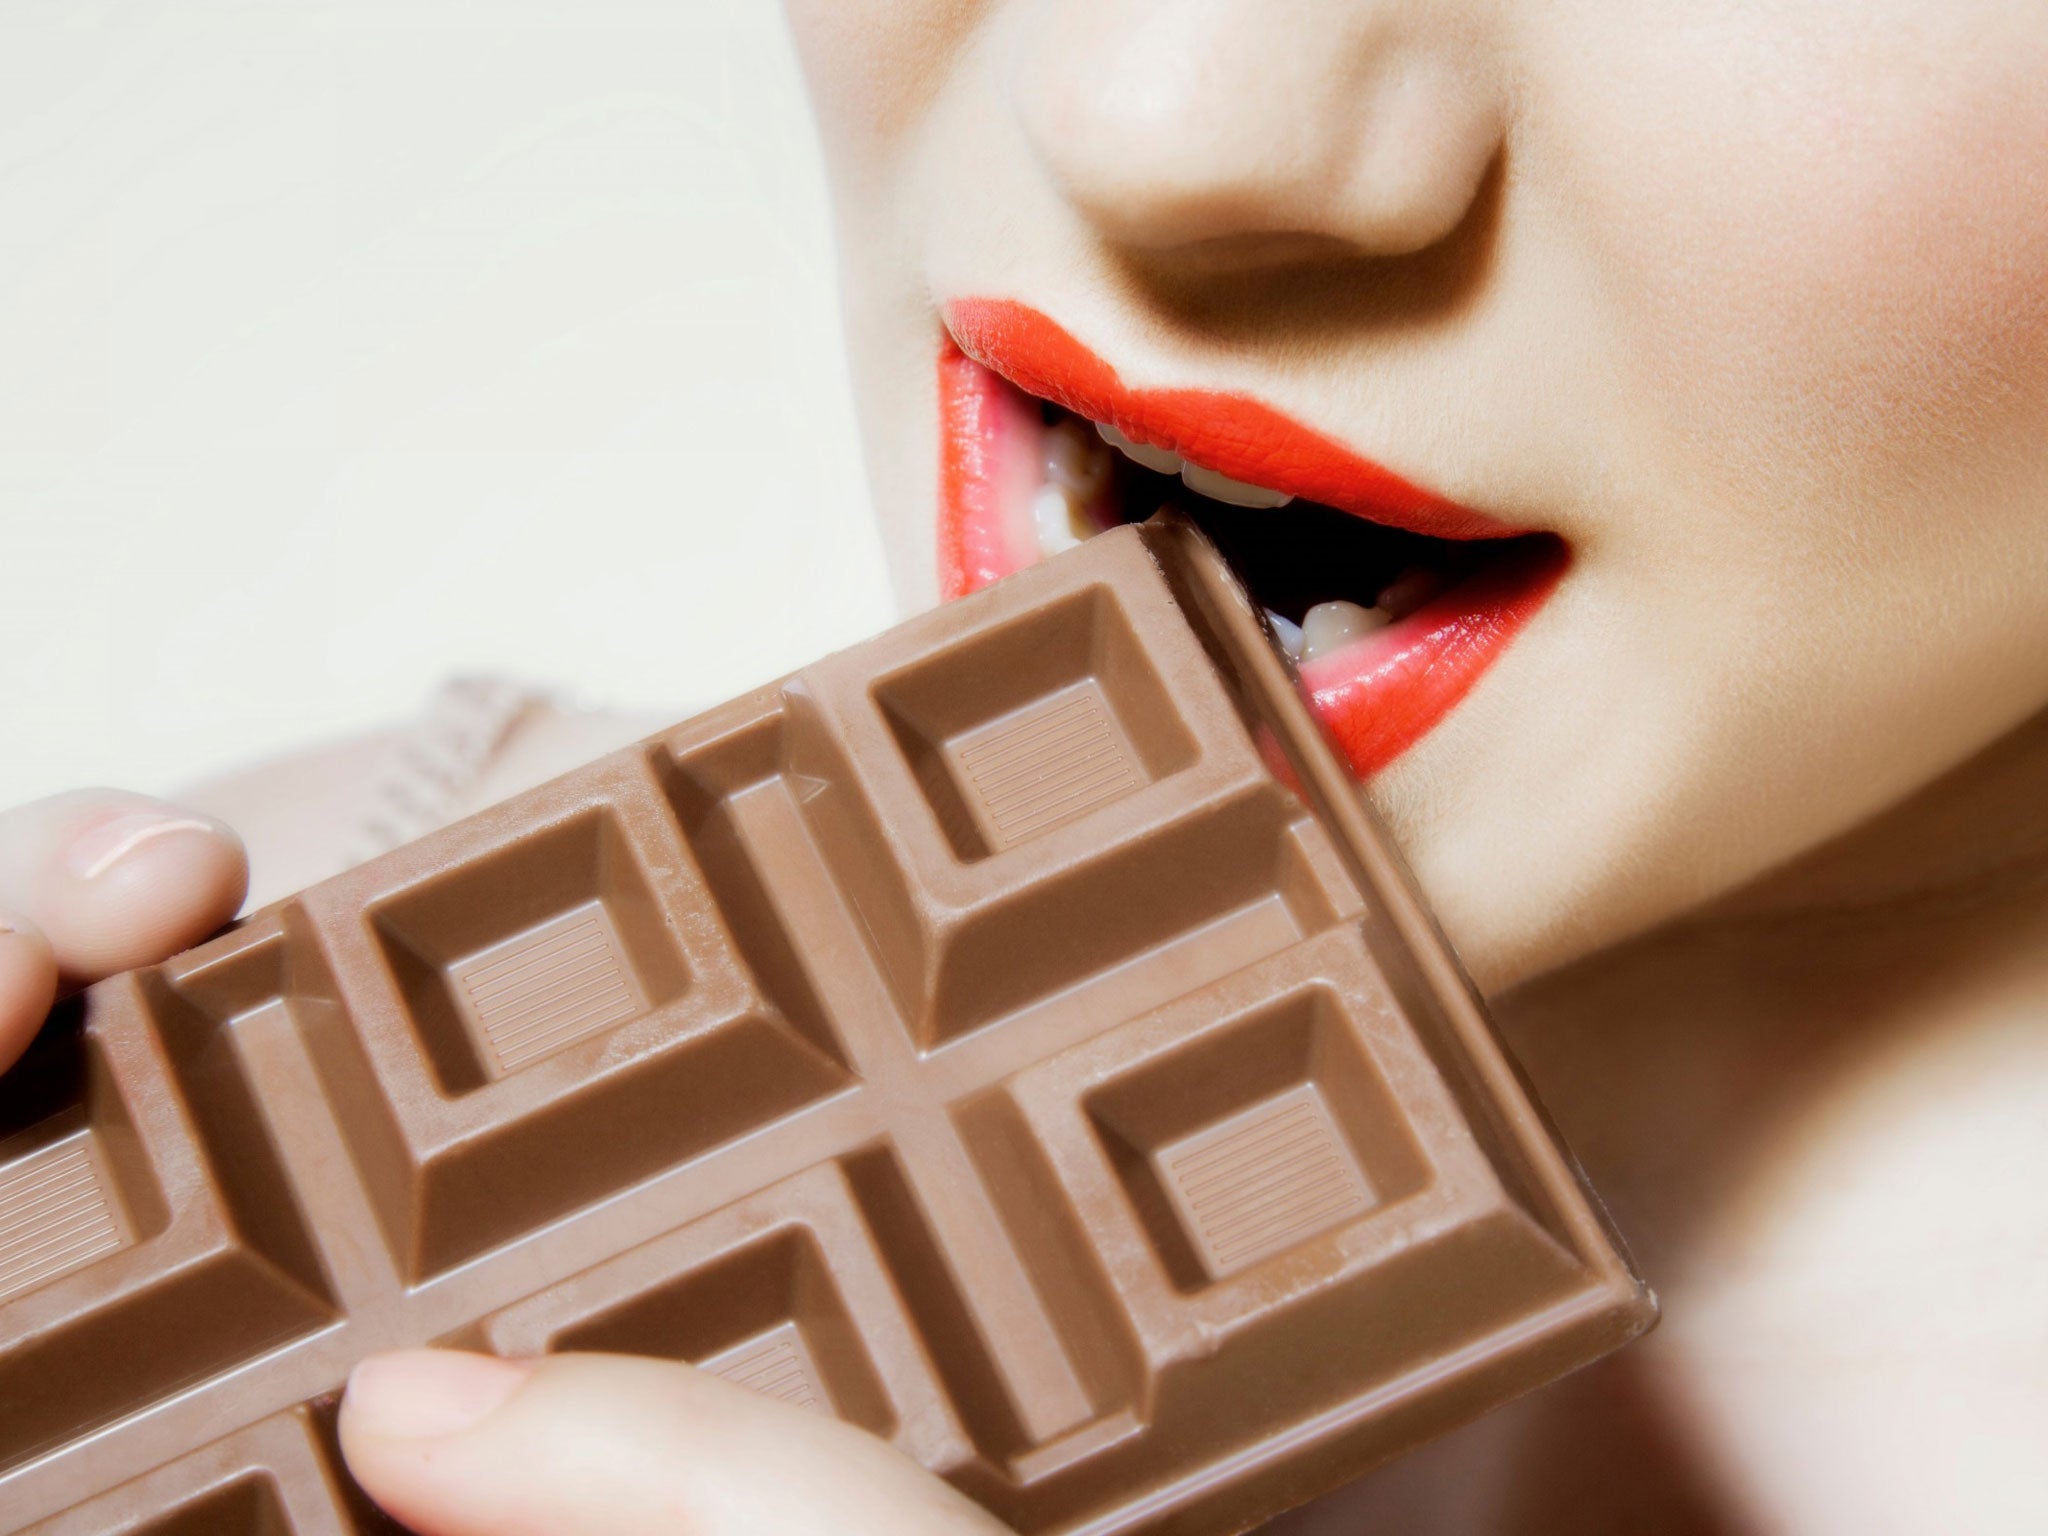 'There's no biological imperative… the female craving for chocolate is culturally determined, not innate.'